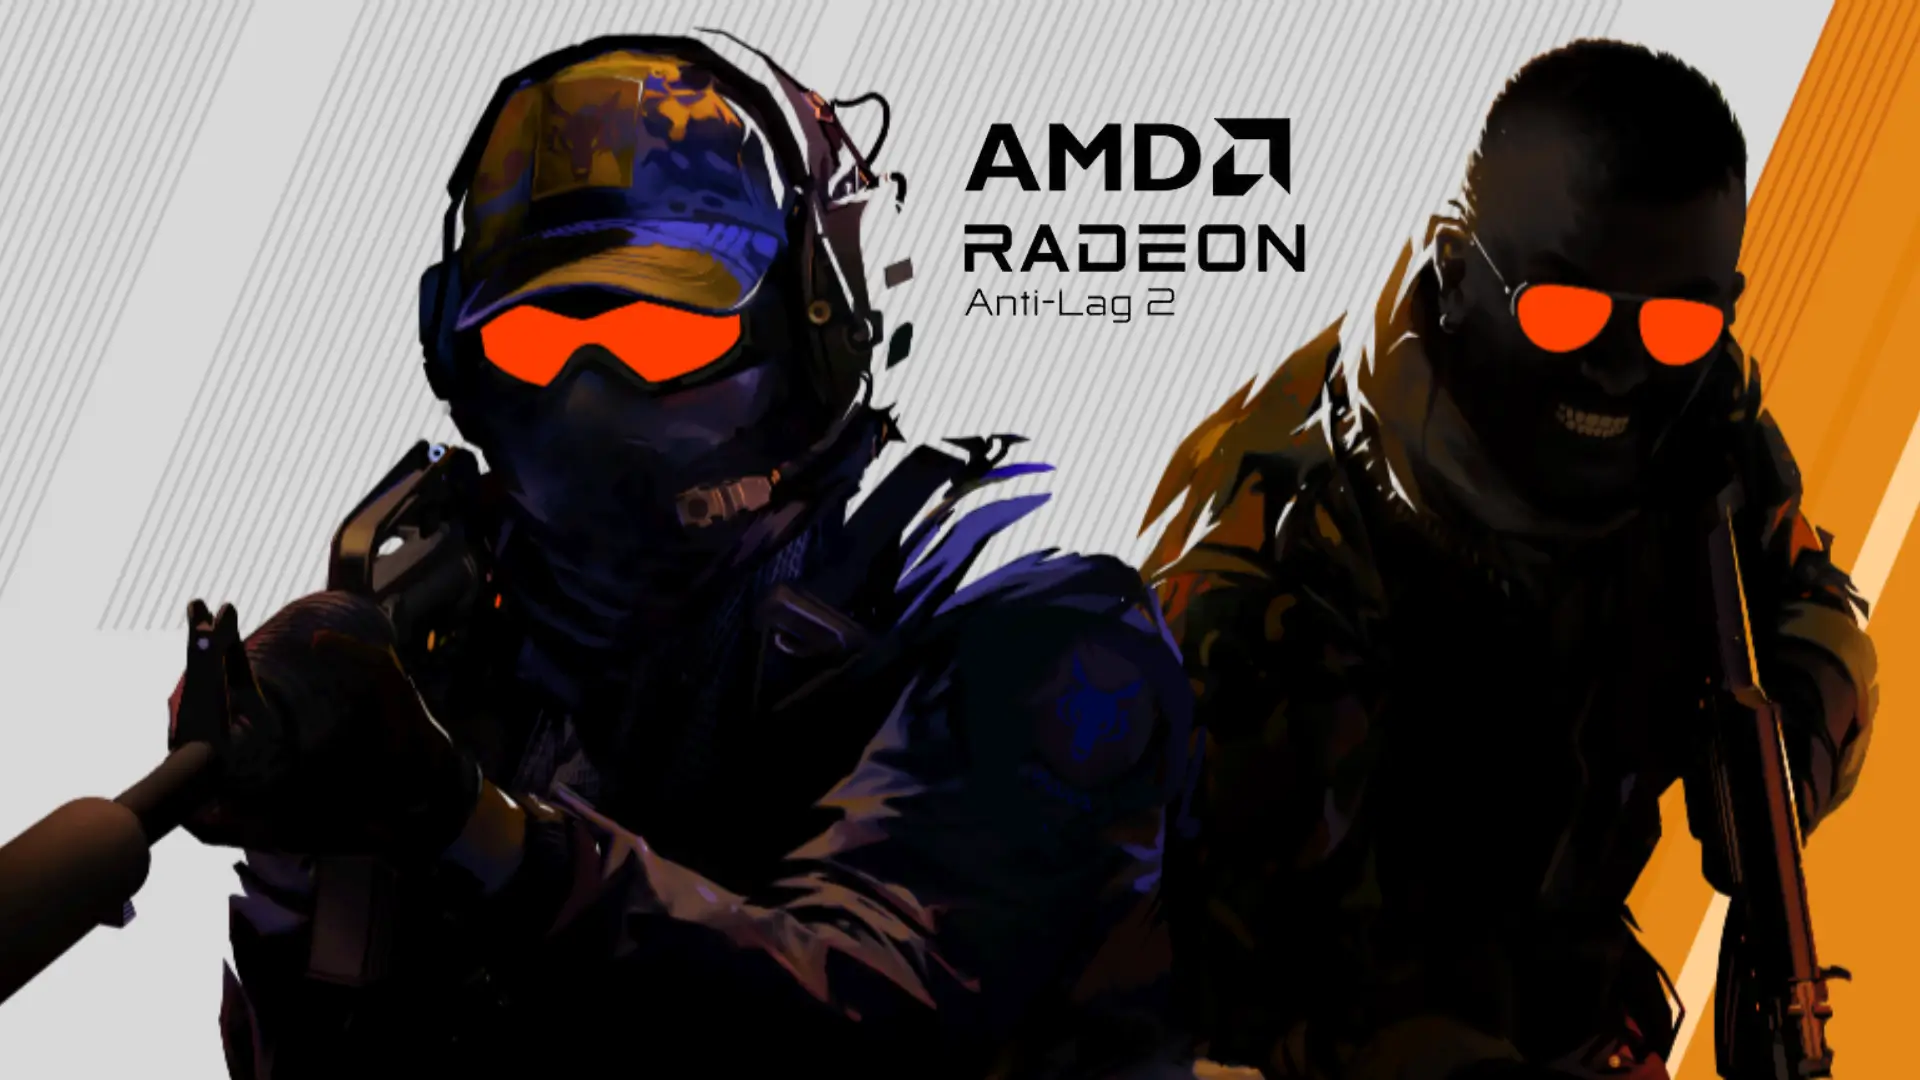 AMD-Introduces-Radeon-Anti-Lag-2-with-Game-Integrated-Technology-Debuts-in-Counter-Strike-2